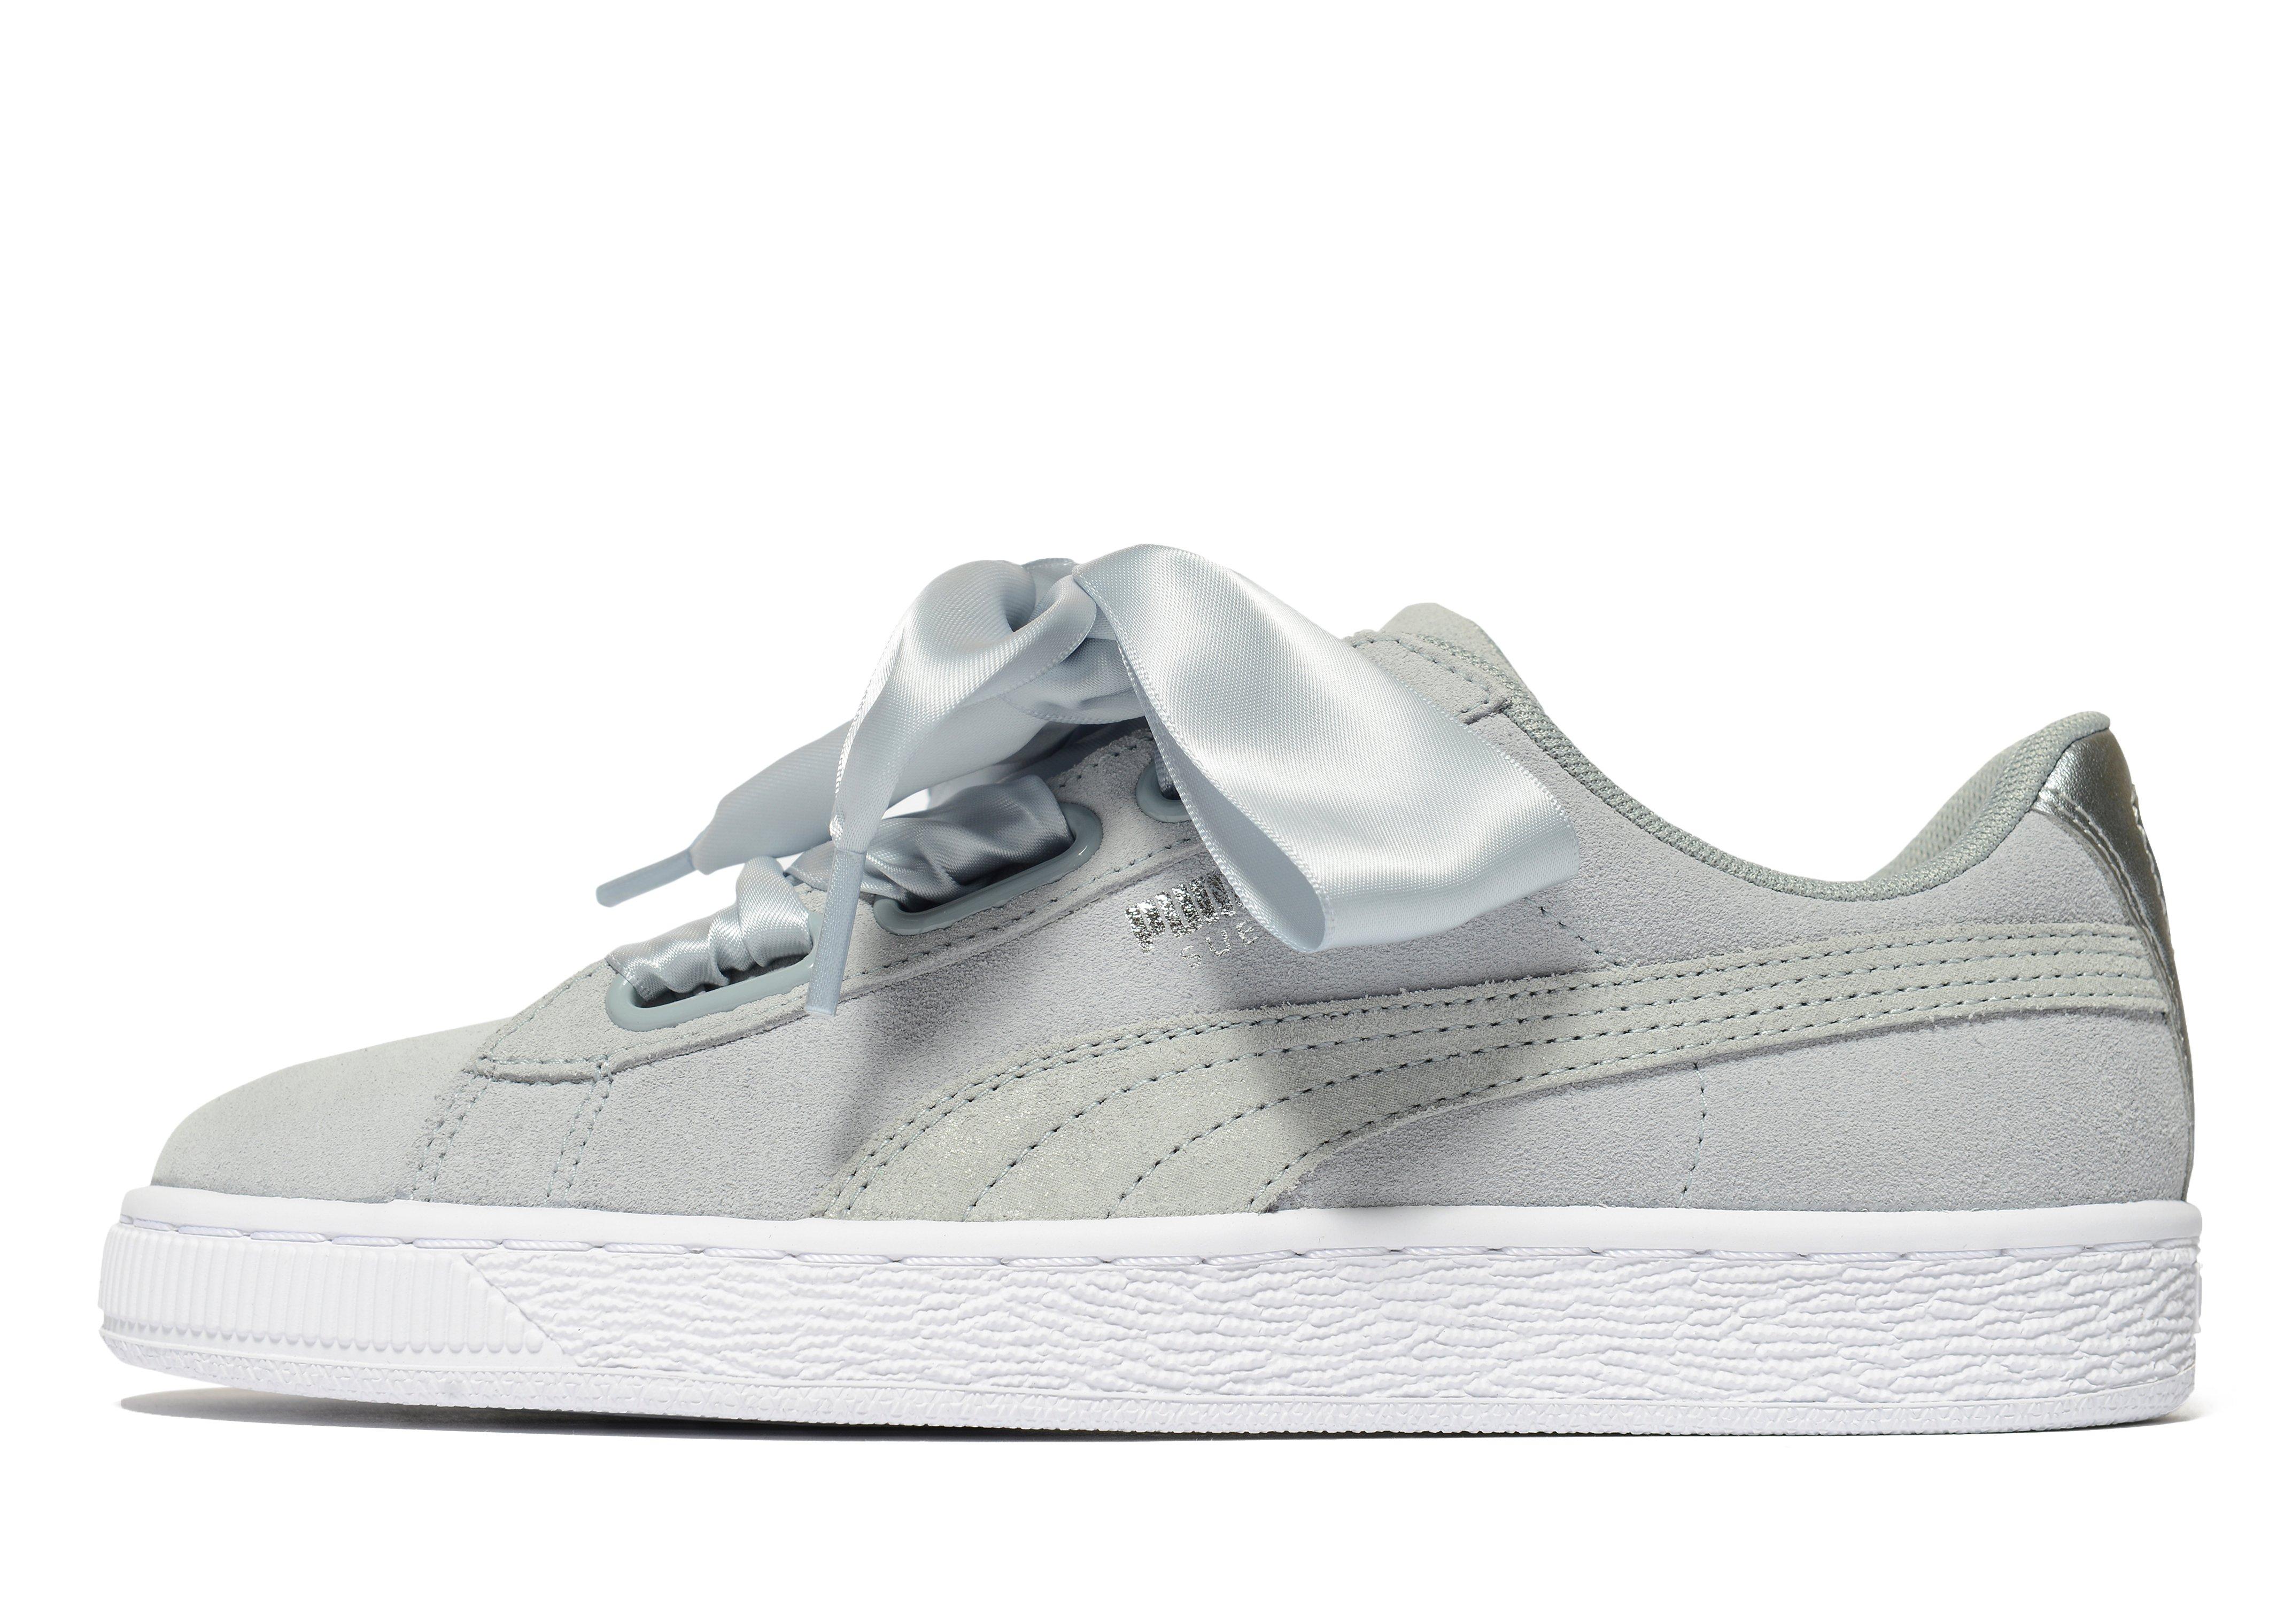 puma trainers womens with bow